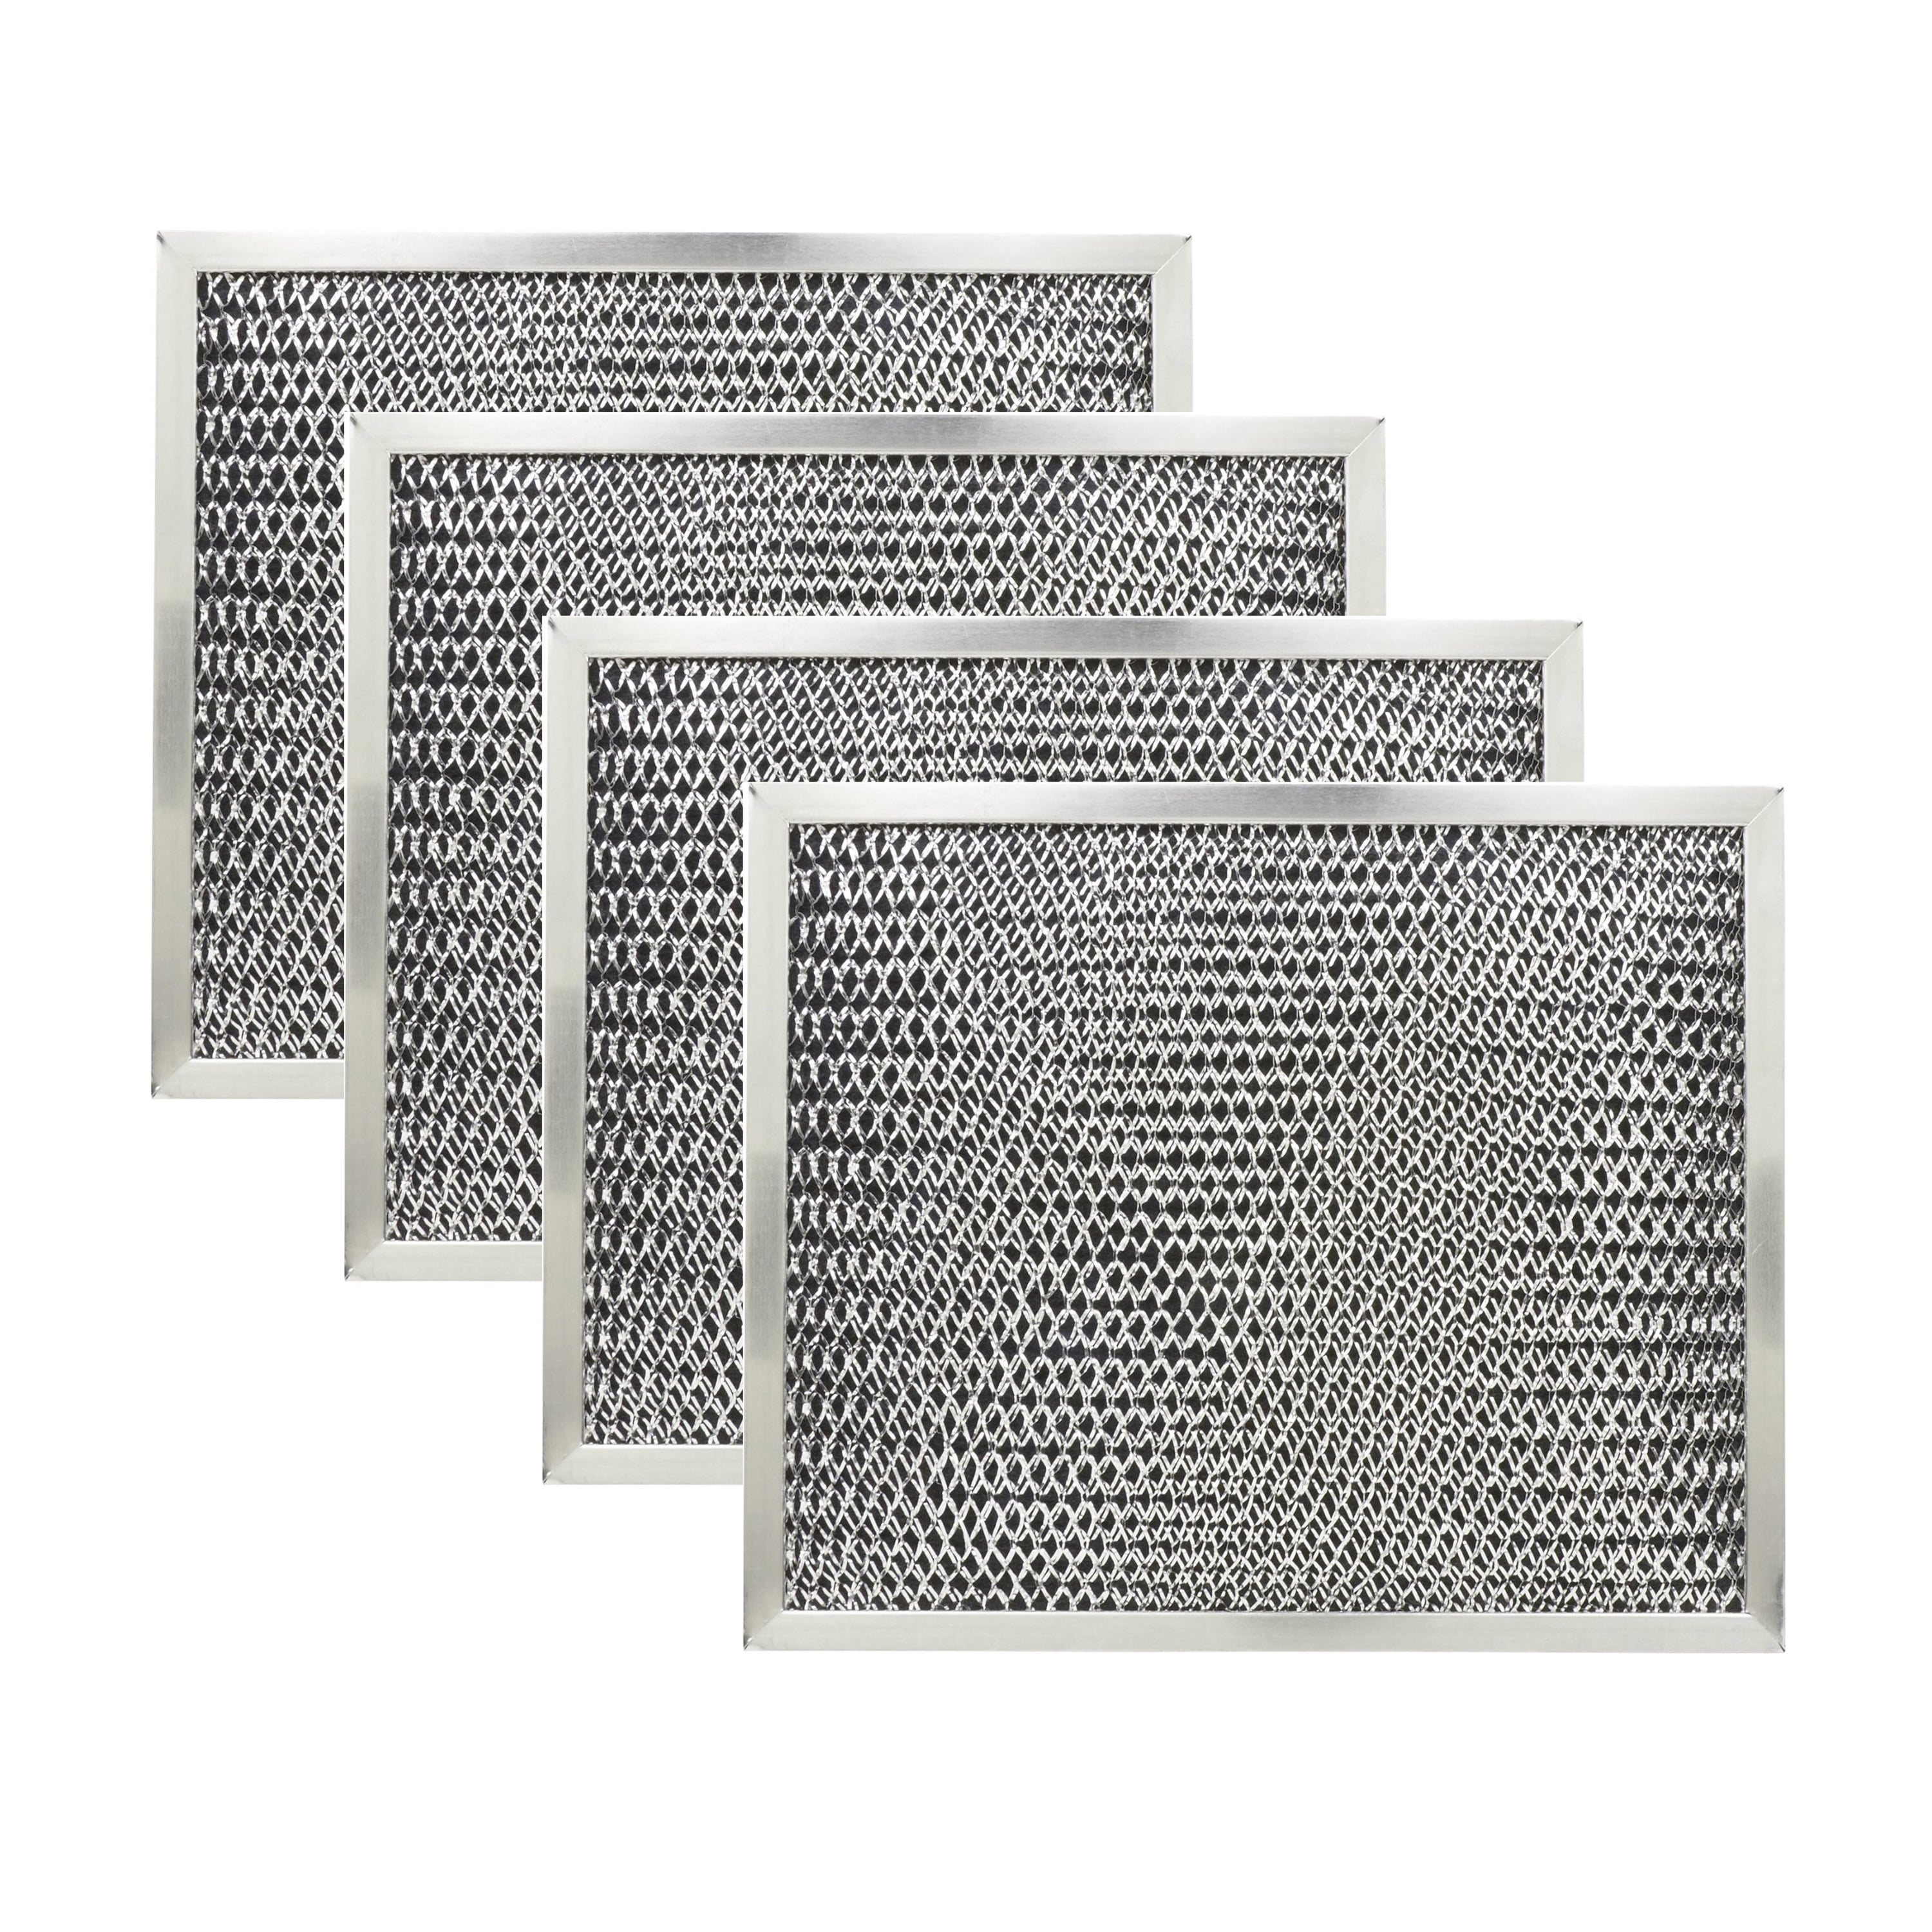 Broan/Nutone 41F Compatible Combo Range Hood Filter Replacement 2-PK 